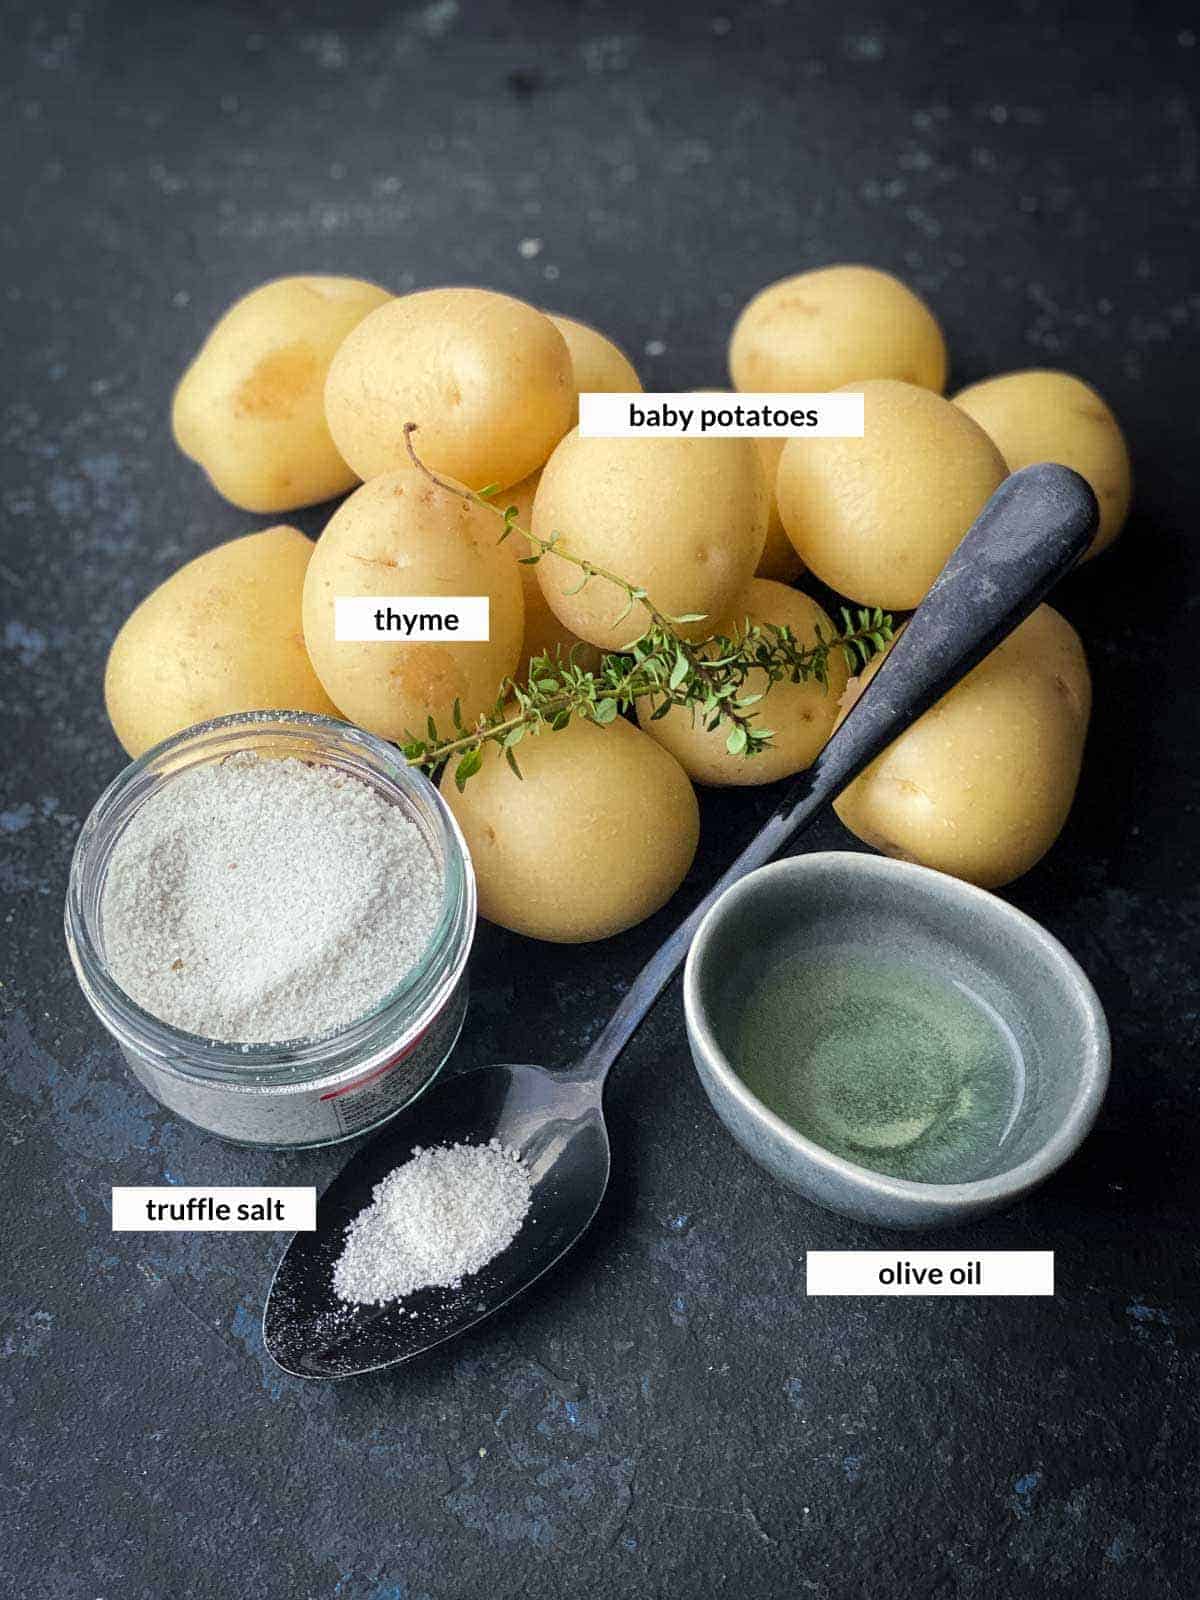 Individually labelled ingredients for Air Fryer Potatoes with Truffle Salt